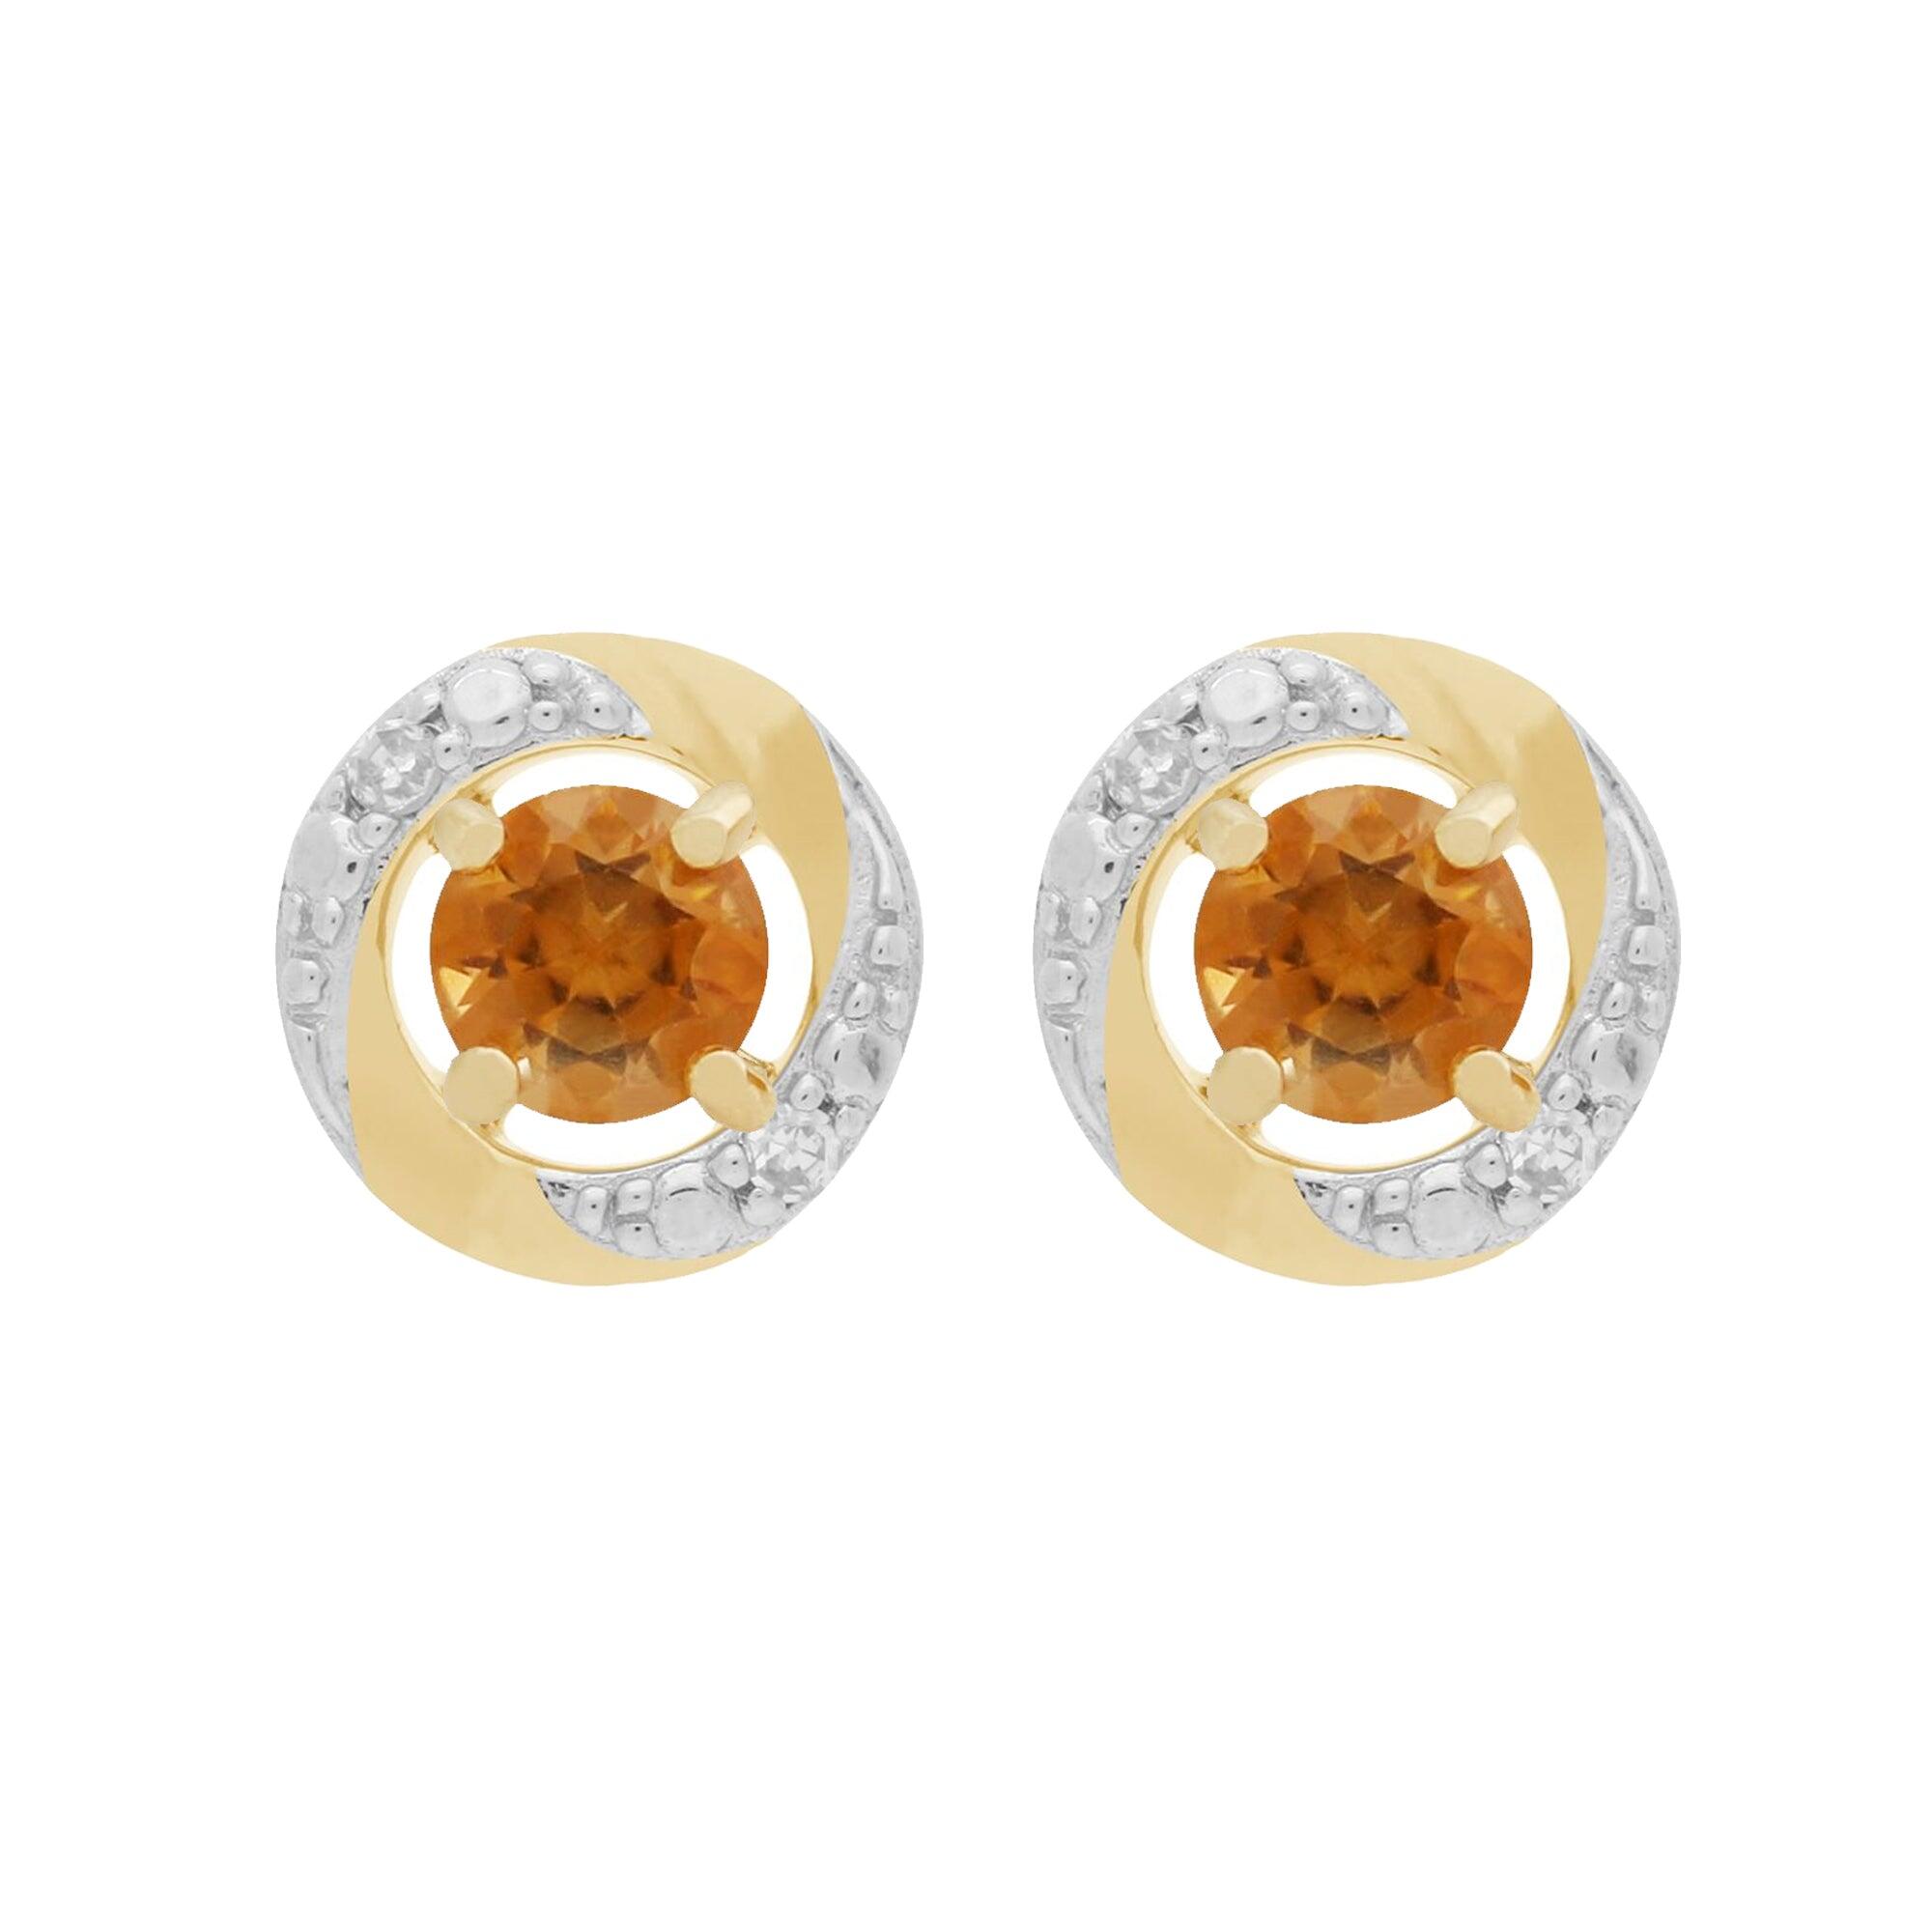 Classic Round Citrine Stud Earrings with Detachable Diamond Halo Ear Jacket in 9ct Yellow Gold